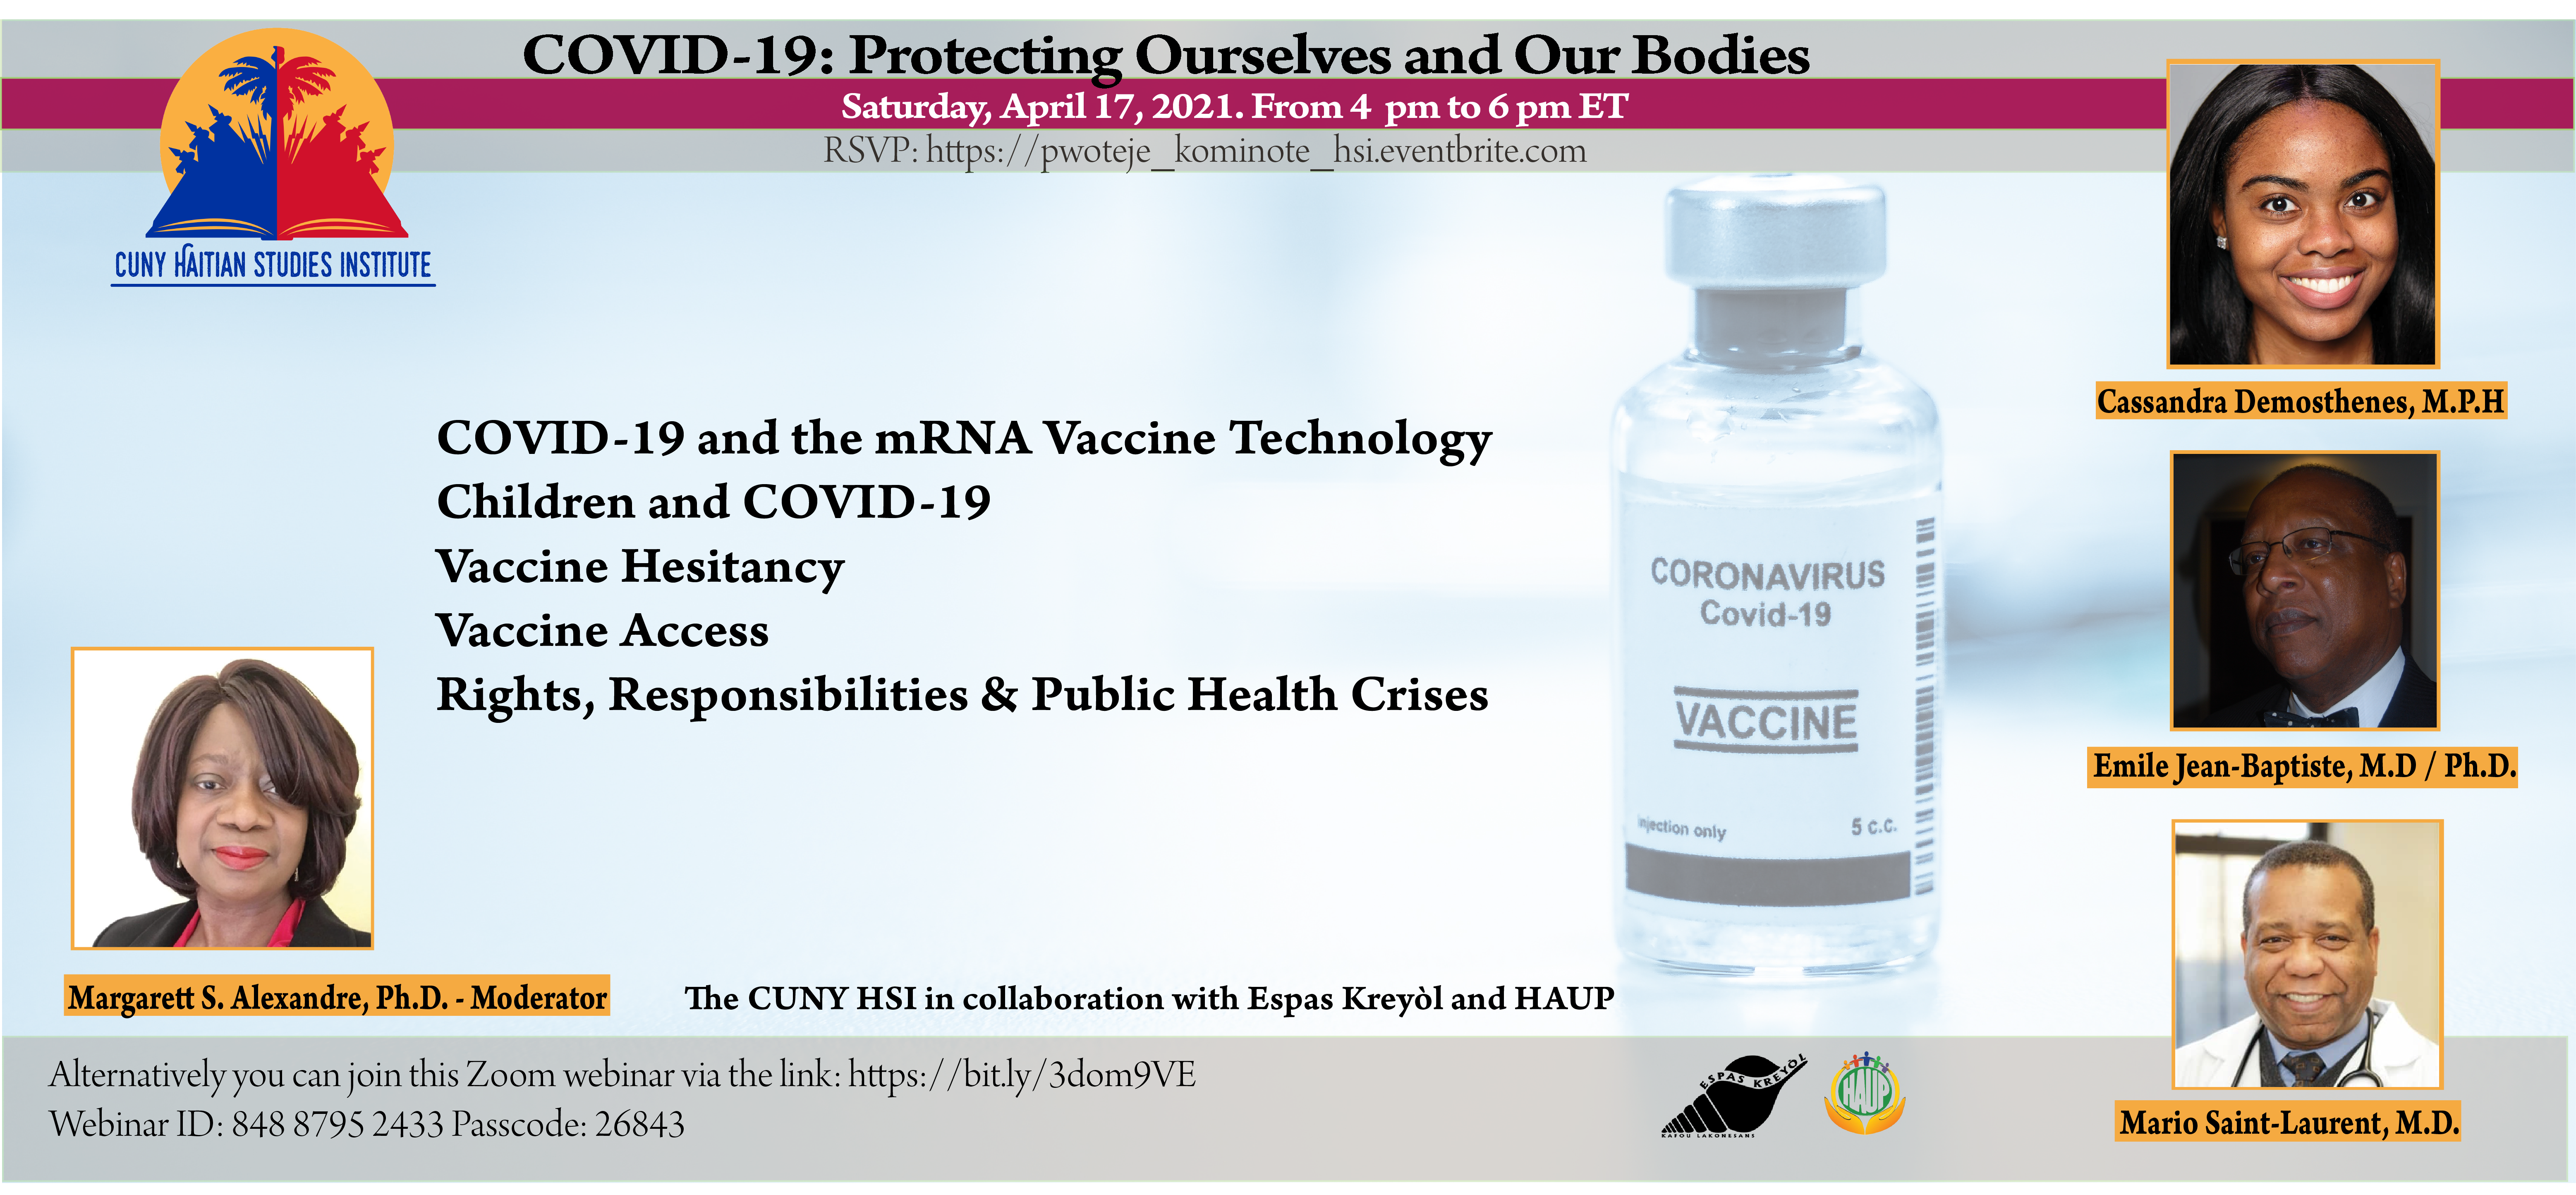 COVID-19 and the mRNA Vaccine Technology